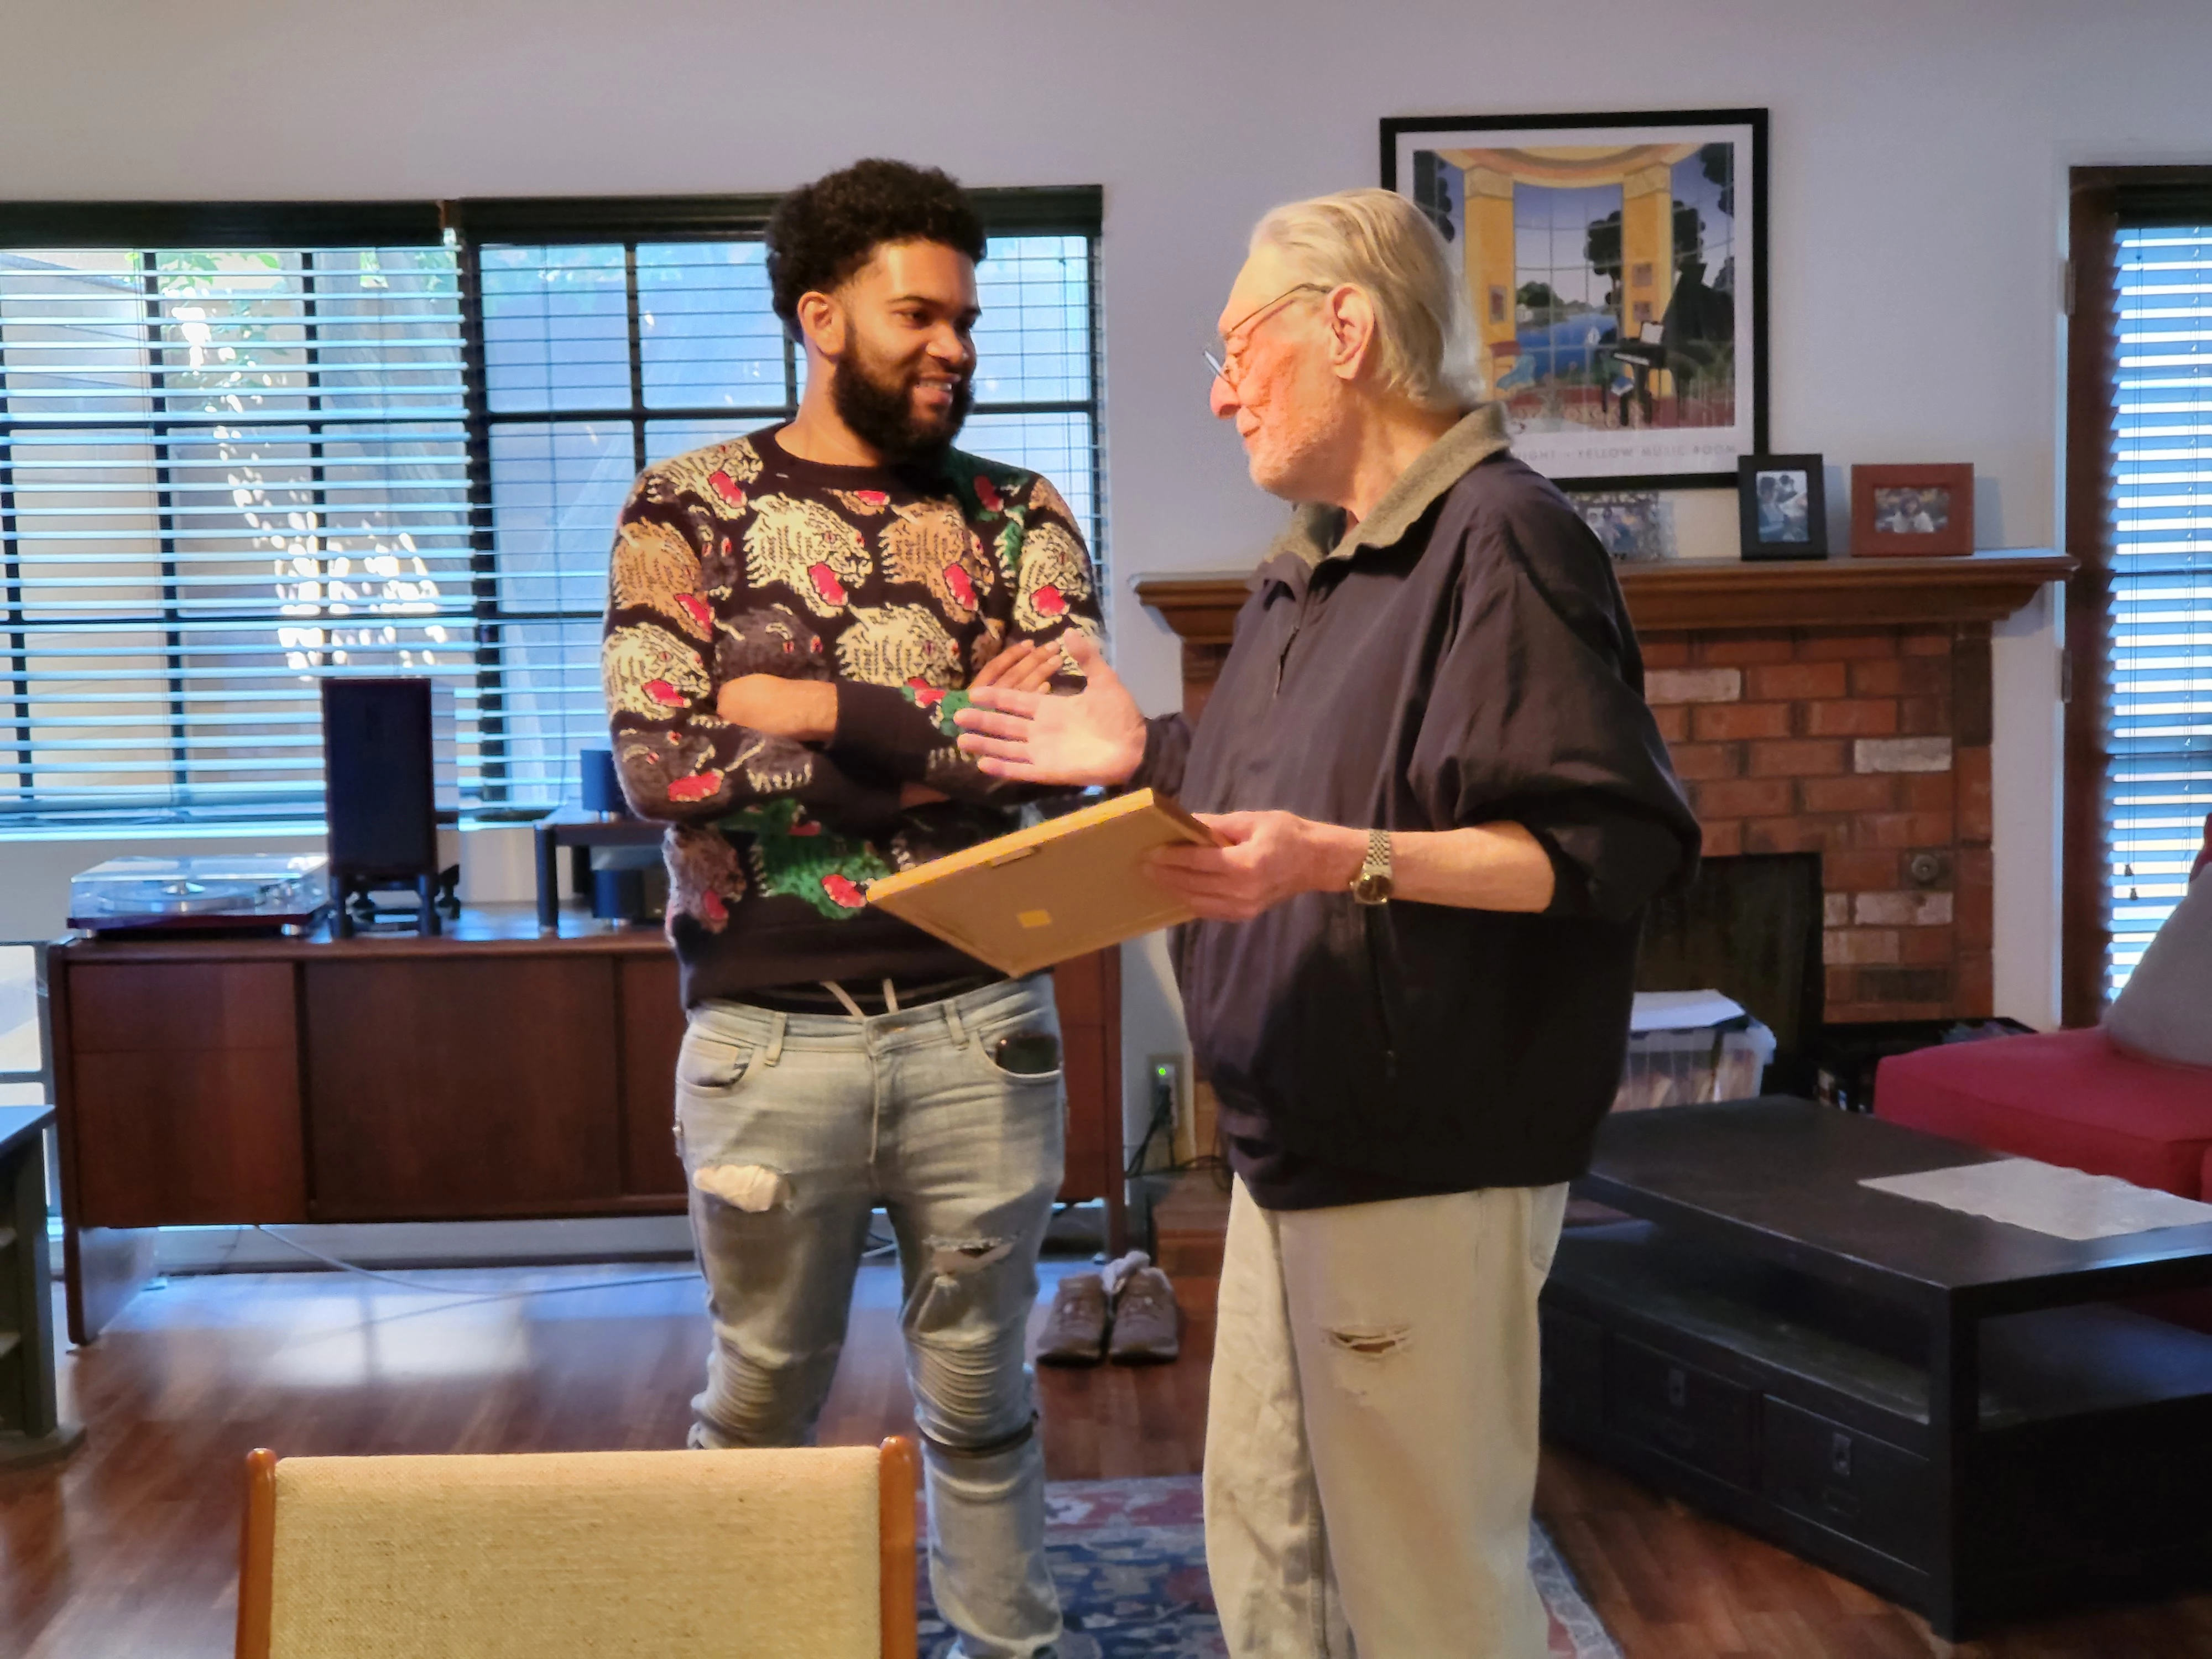 At Senior Helpers, we believe that there is richness and lessons to be learned from the stories that clients' share. Meet Tevin and Joel. Our caregivers engage with our clients to share their experiences, to challenge each other's minds, laugh and if need be, cry together.